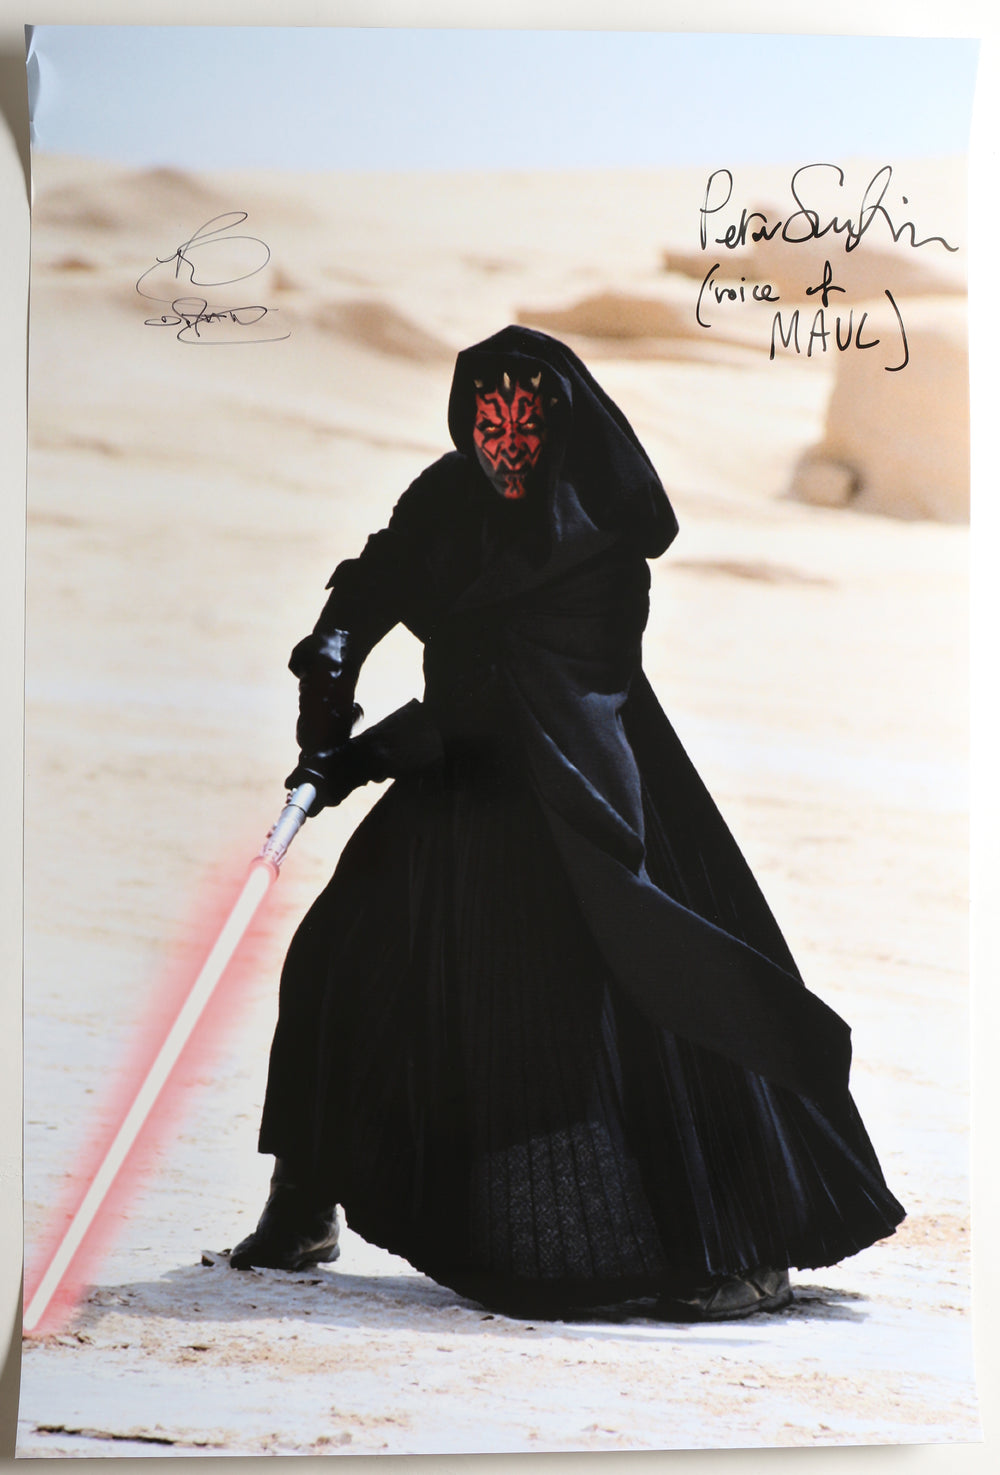 Ray Park & Peter Serafinowicz as Darth Maul in Star Wars Episode I: The Phantom Menace Signed 20x30 Poster